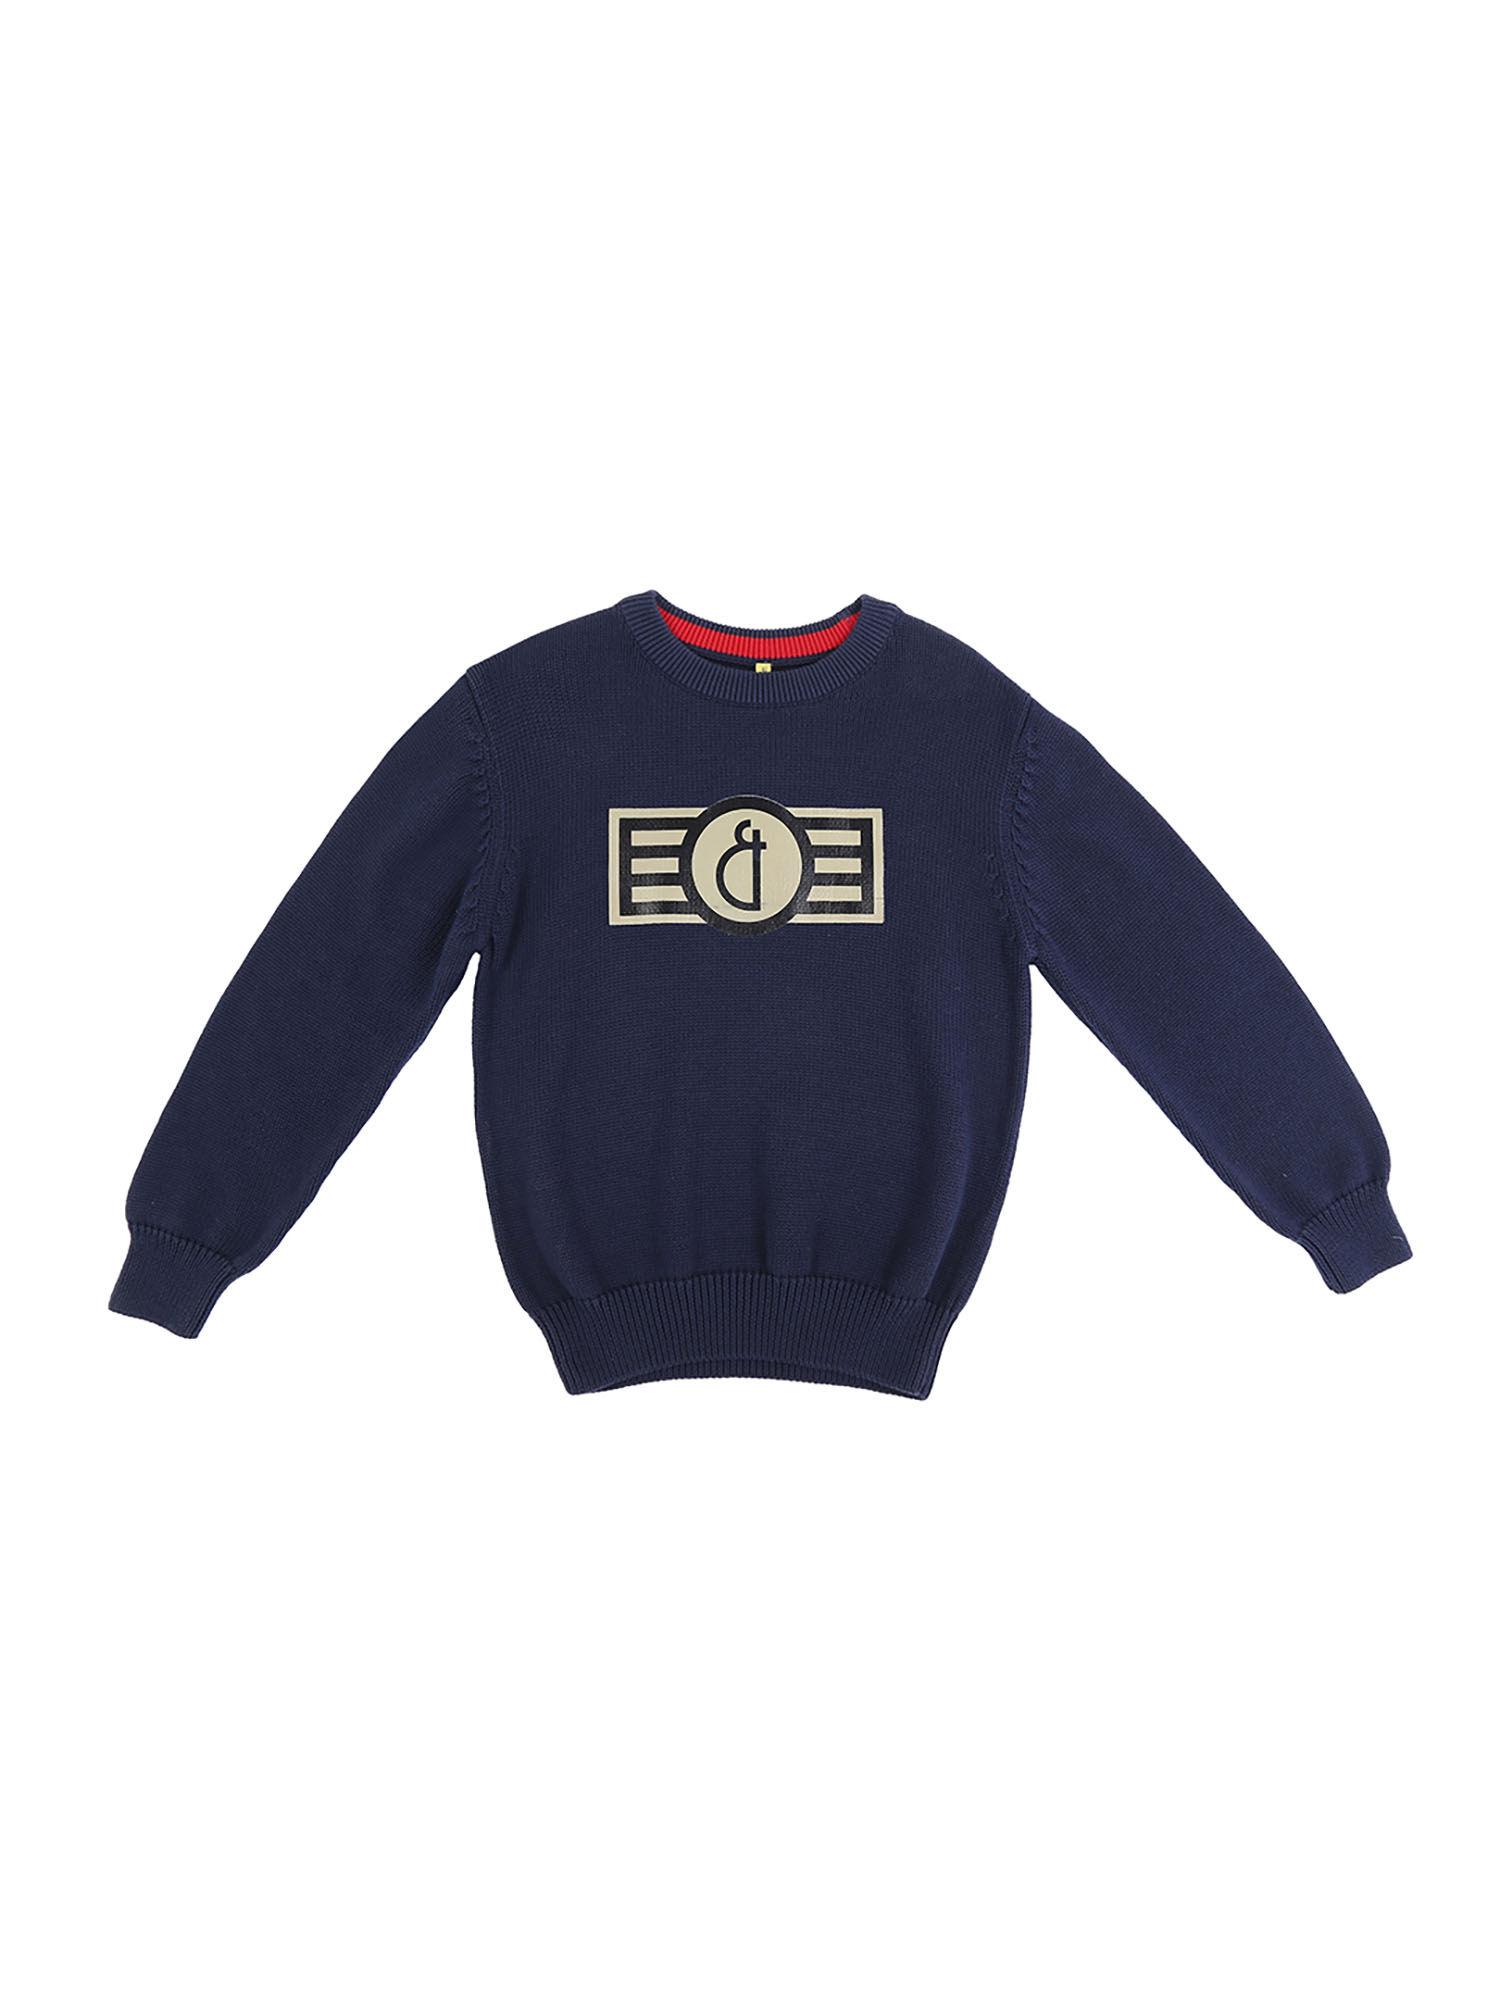 navy blue color solid plain sweater